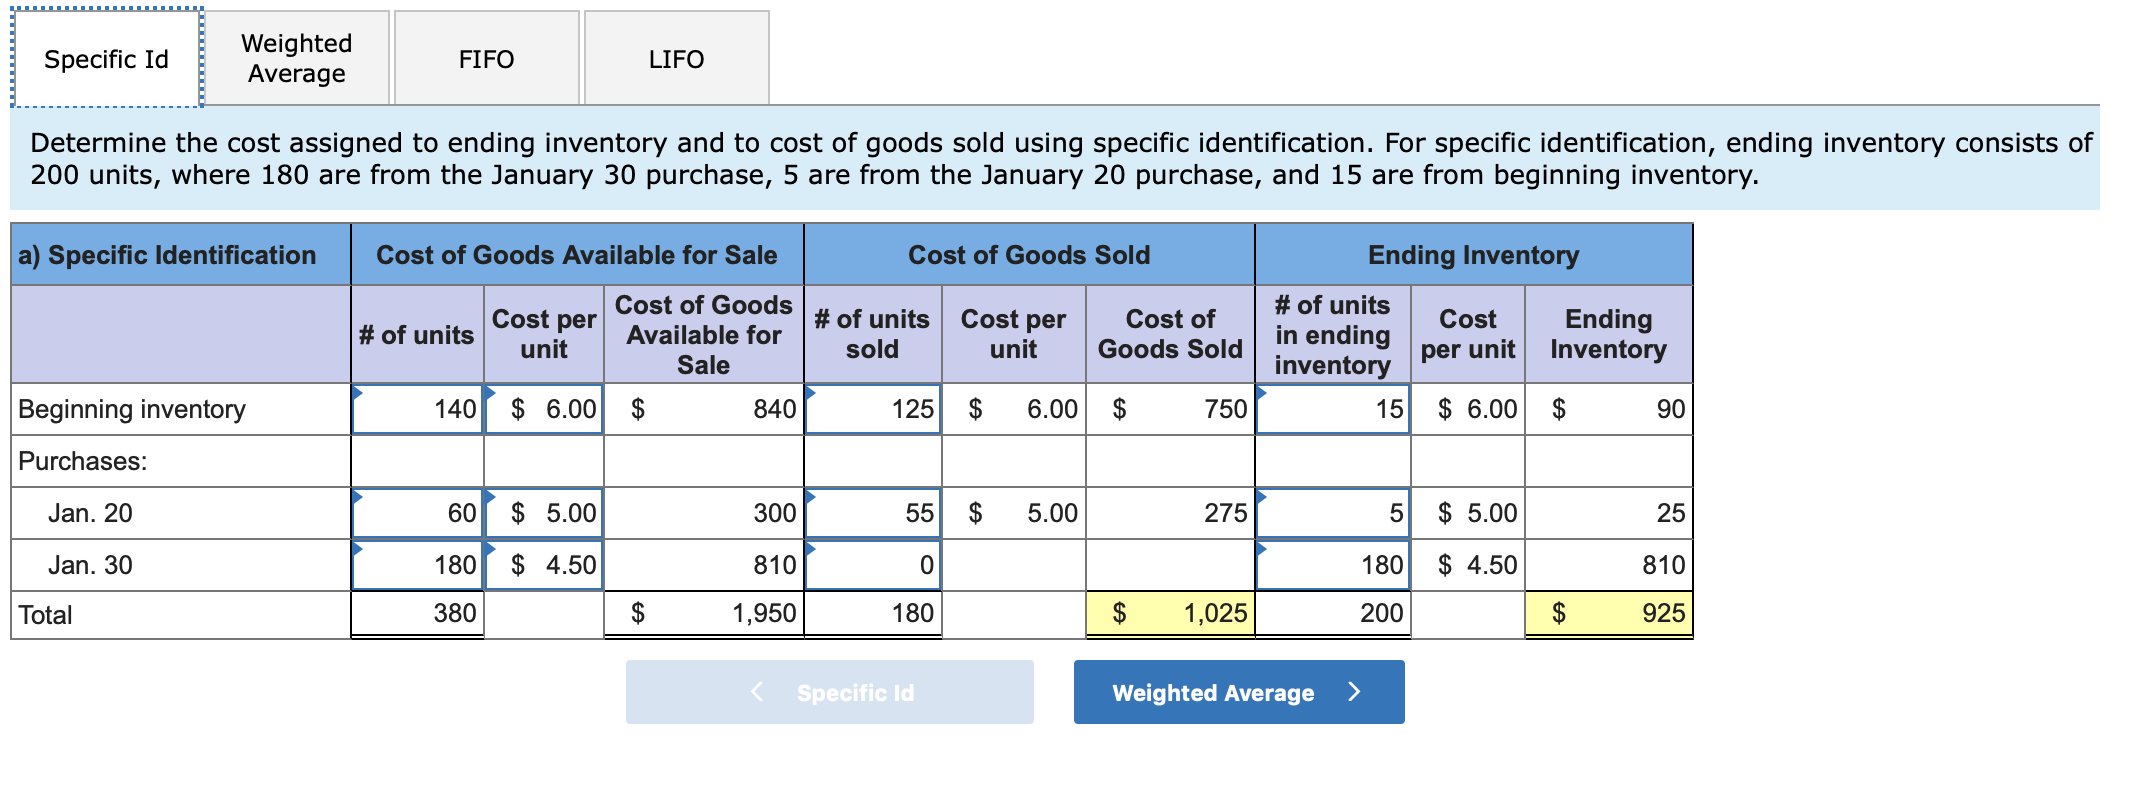 Weighted
Average
Specific Id
FIFO
LIFO
Determine the cost assigned to ending inventory and to cost of goods sold using specific identification. For specific identification, ending inventory consists of
200 units, where 180 are from the January 30 purchase, 5 are from the January 20 purchase, and 15 are from beginning inventory.
a) Specific Identification
Cost of Goods Available for Sale
Cost of Goods Sold
Ending Inventory
Cost of Goods # of units
#of units
# of units Cost per
unit
Cost per
Cost of
Cost
Ending
Inventory
in ending
Available for
inventory per unit
15 6.00 $
sold
unit
Goods Sold
Sale
125 $
Beginning inventory
6.00 $
6.00 $
90
140
840
750
Purchases:
55$
5 5.00
Jan. 20
60
5.00
300
5.00
275
25
$ 4.50
4.50
180
Jan. 30
810
0
180
810
$
$
$
1,950
1,025
380
180
200
925
Total
Weighted Average>
Specific Id
